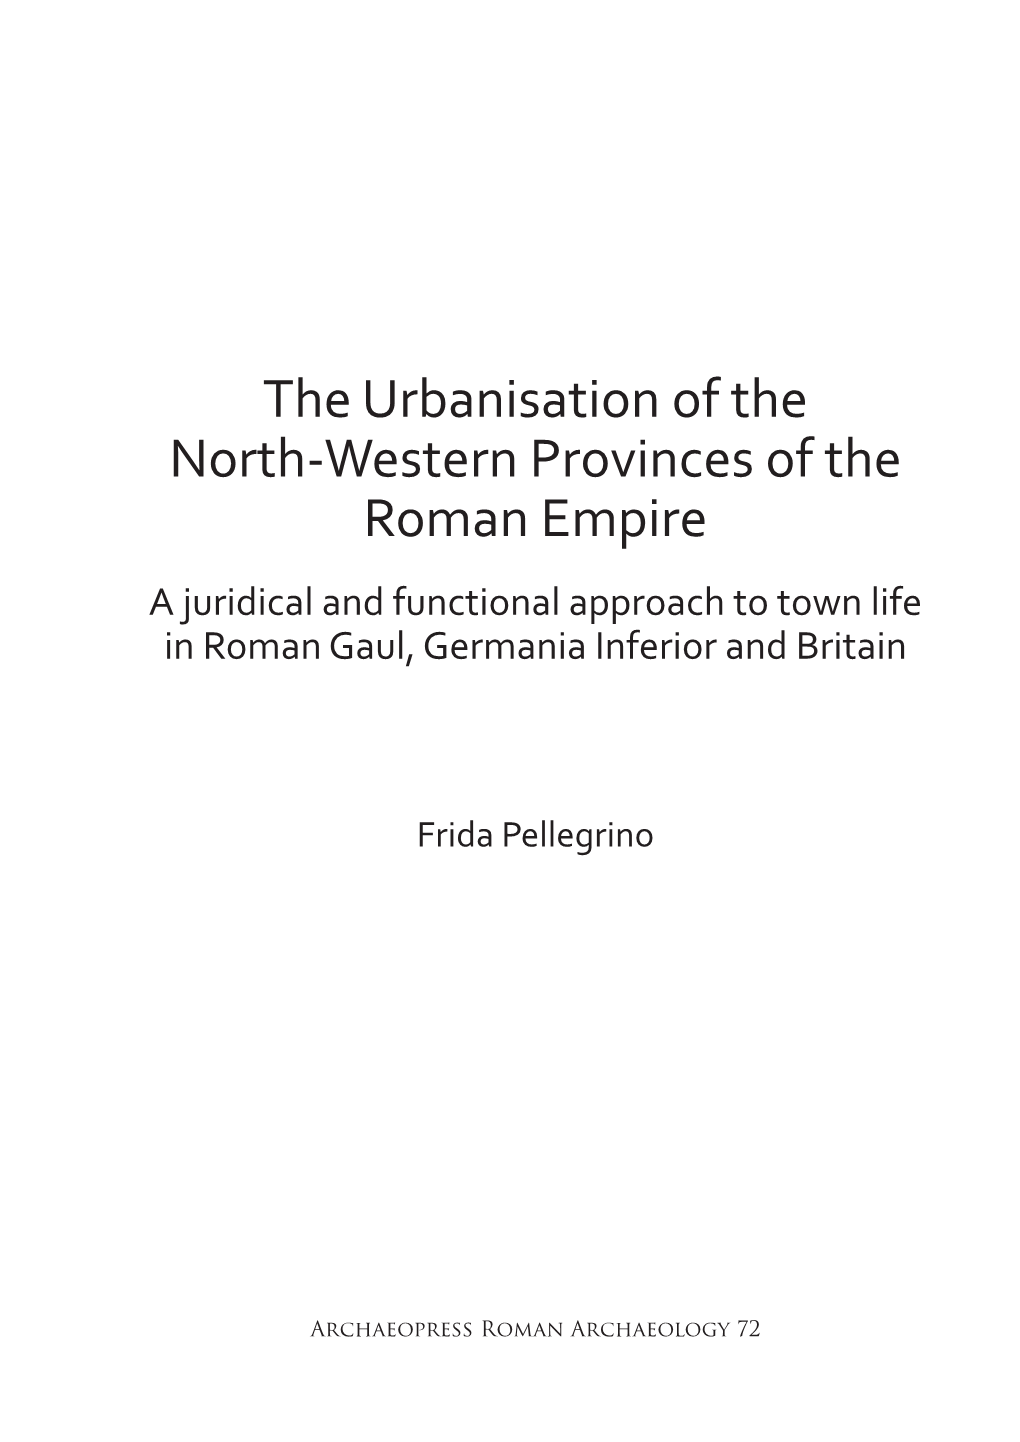 The Urbanisation of the North-Western Provinces of the Roman Empire a Juridical and Functional Approach to Town Life in Roman Gaul, Germania Inferior and Britain